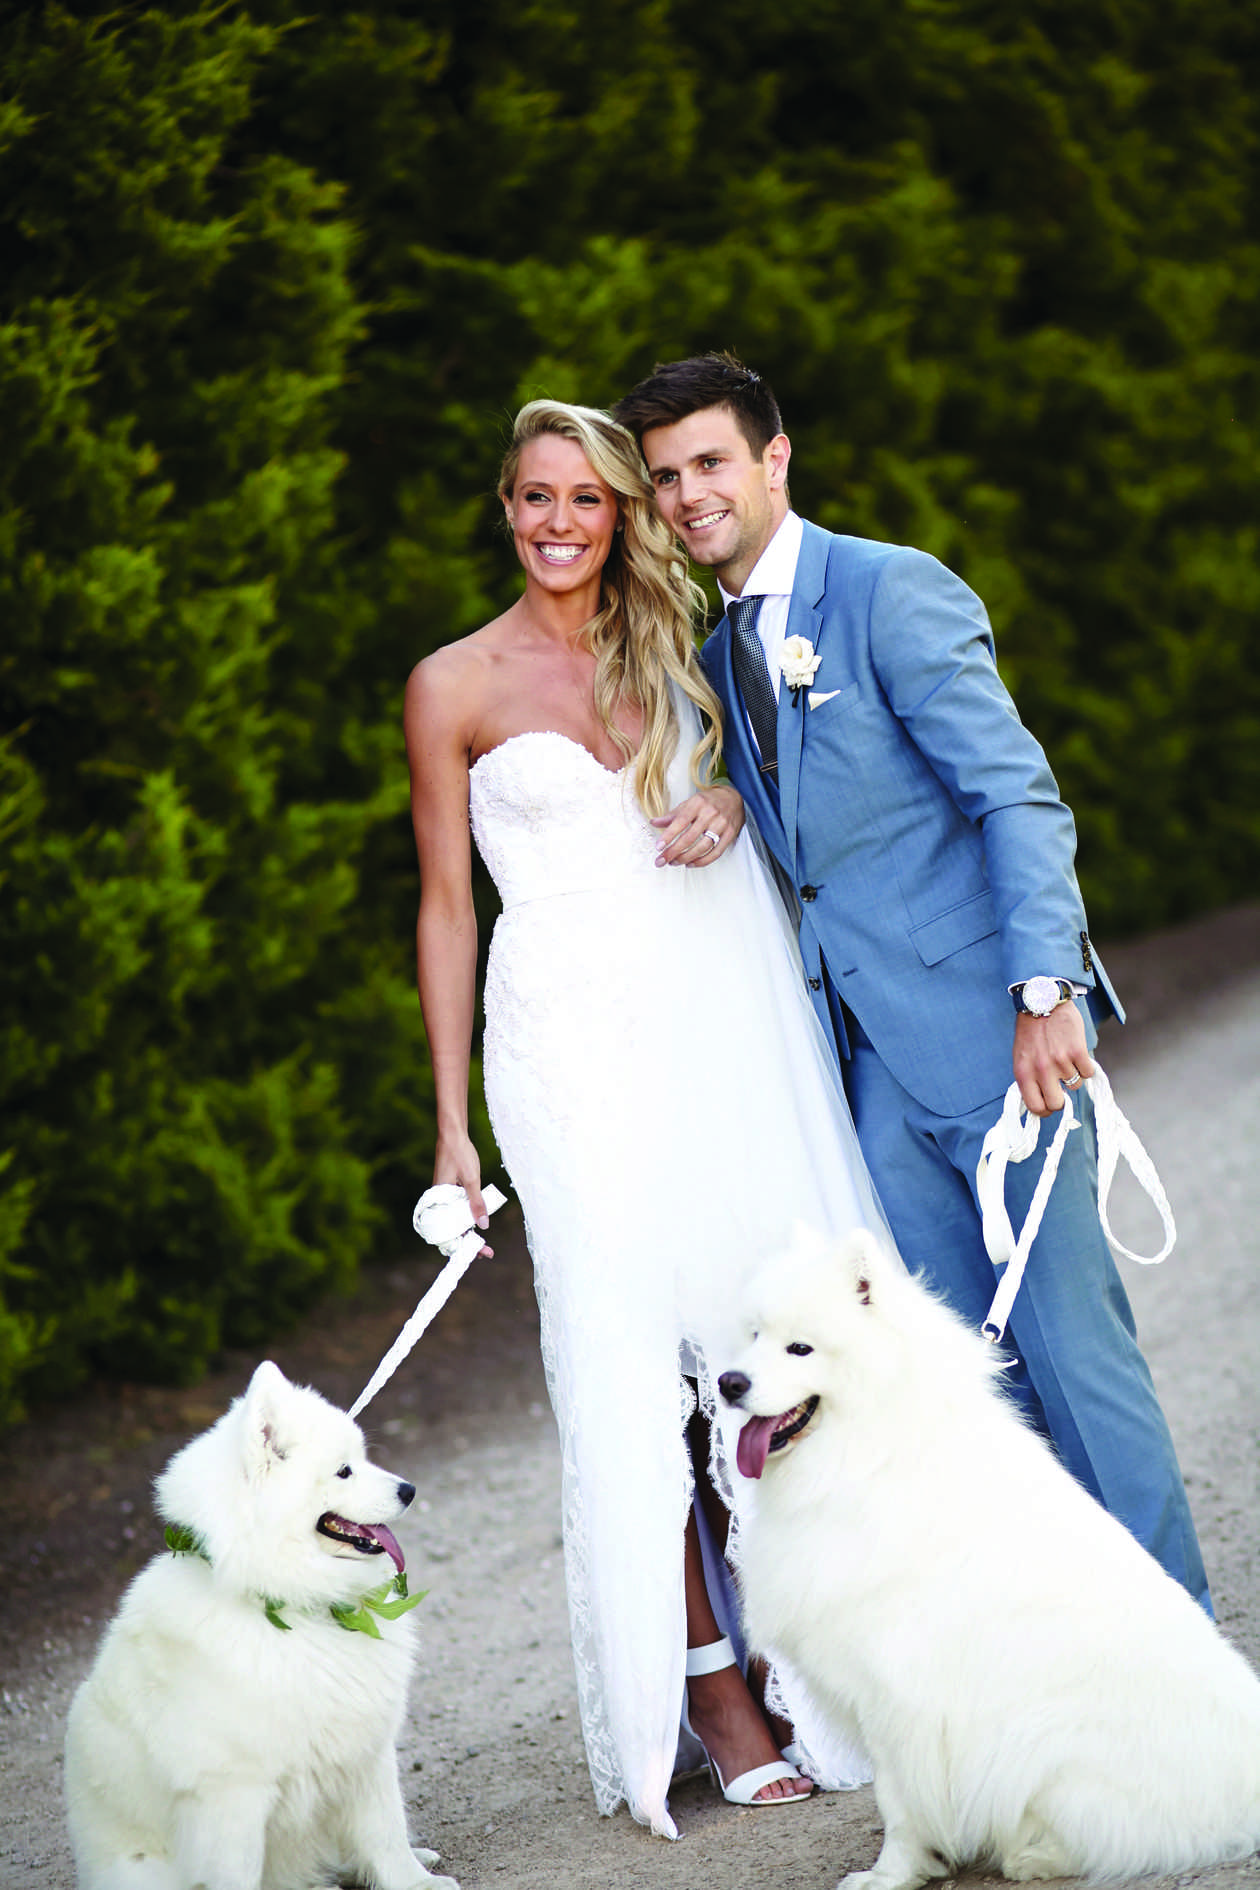 Trent and Brooke's Wedding Photos with Dogs at Private Residence